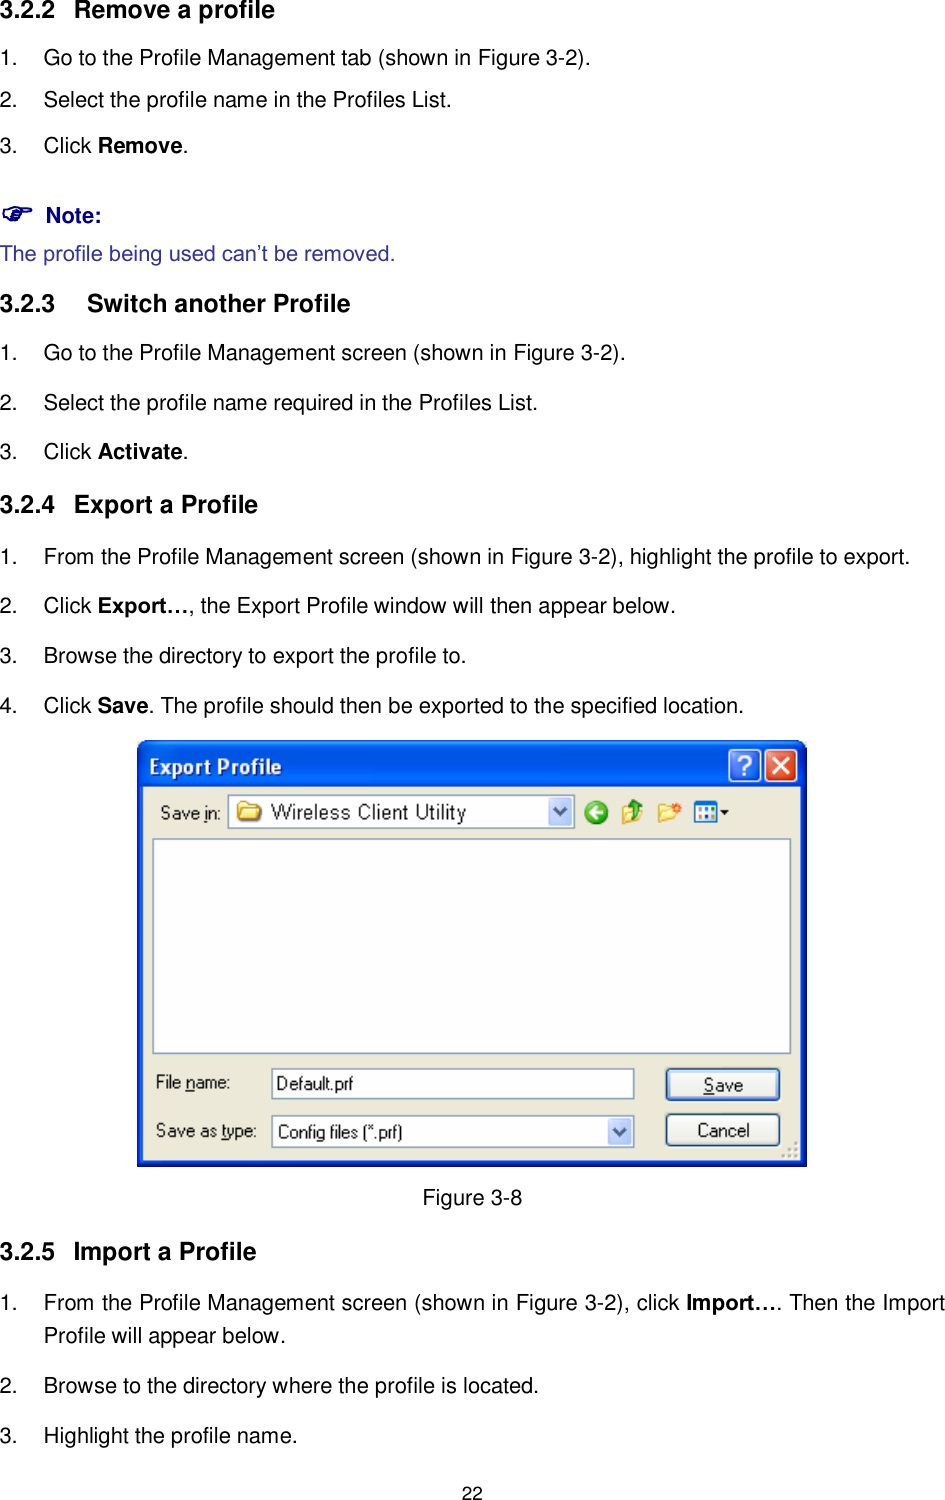  22 3.2.2  Remove a profile 1.  Go to the Profile Management tab (shown in XFigure 3-2X). 2.  Select the profile name in the Profiles List. 3.  Click Remove.  Note: The profile being used can‟t be removed. 3.2.3  Switch another Profile 1.  Go to the Profile Management screen (shown in XFigure 3-2X). 2.  Select the profile name required in the Profiles List. 3.  Click Activate. 3.2.4  Export a Profile 1.  From the Profile Management screen (shown in XFigure 3-2X), highlight the profile to export. 2.  Click Export…, the Export Profile window will then appear below. 3.  Browse the directory to export the profile to. 4.  Click Save. The profile should then be exported to the specified location.  Figure 3-8 3.2.5  Import a Profile 1.  From the Profile Management screen (shown in XFigure 3-2), click Import…. Then the Import Profile will appear below. 2.  Browse to the directory where the profile is located. 3.  Highlight the profile name. 